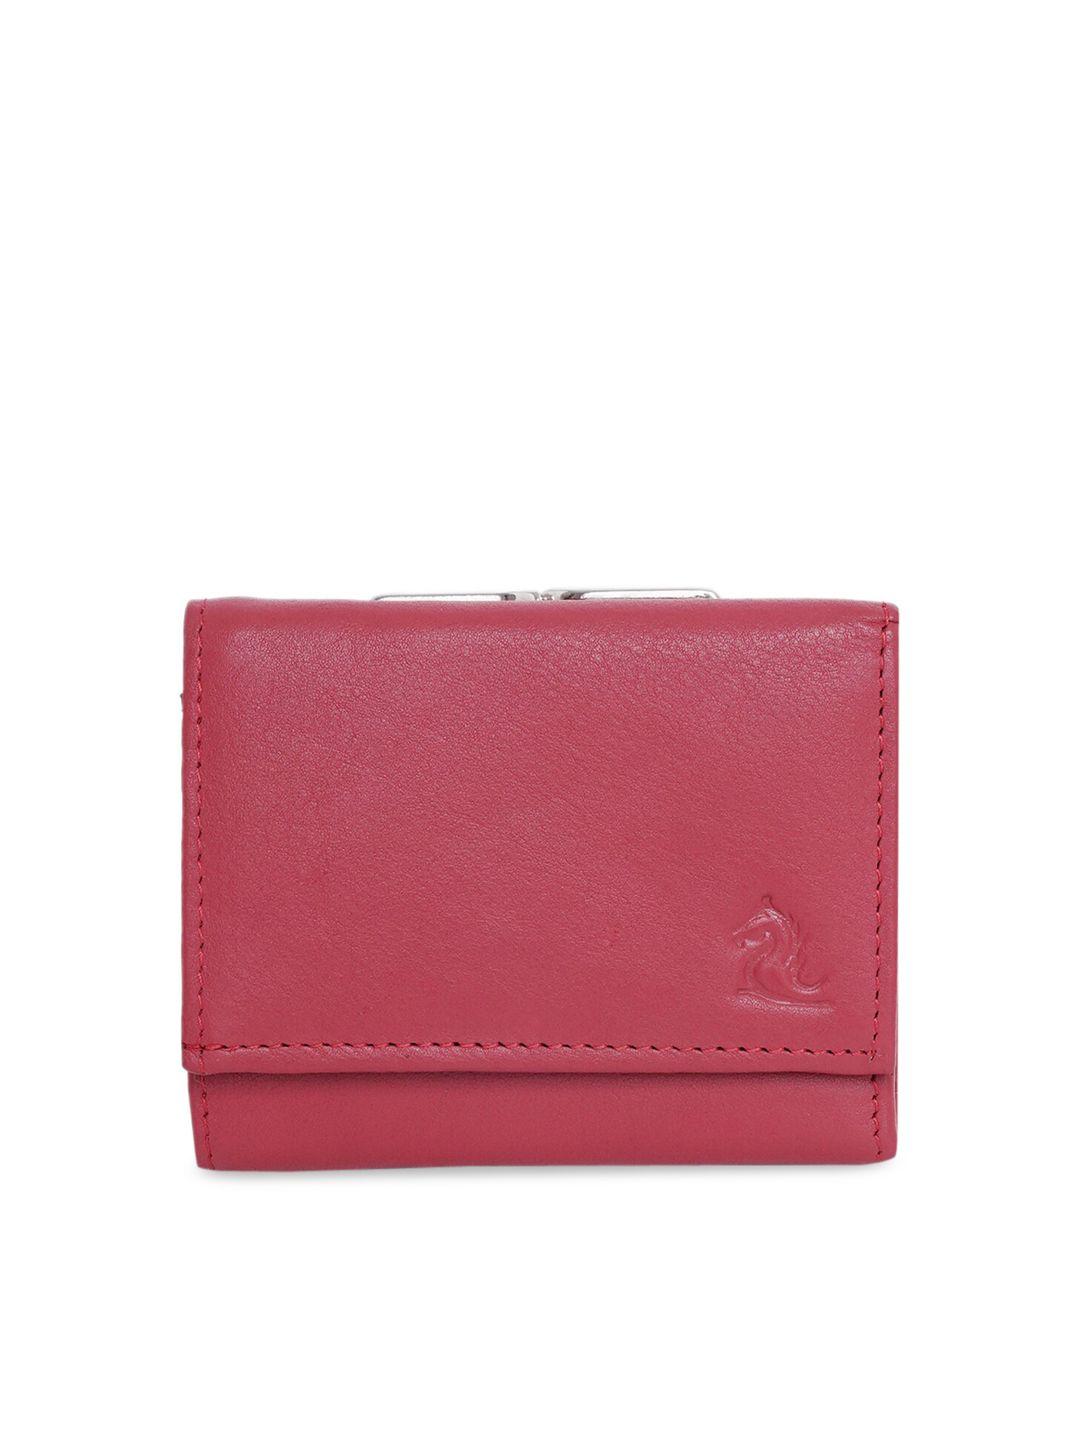 kara women red solid leather three fold wallet